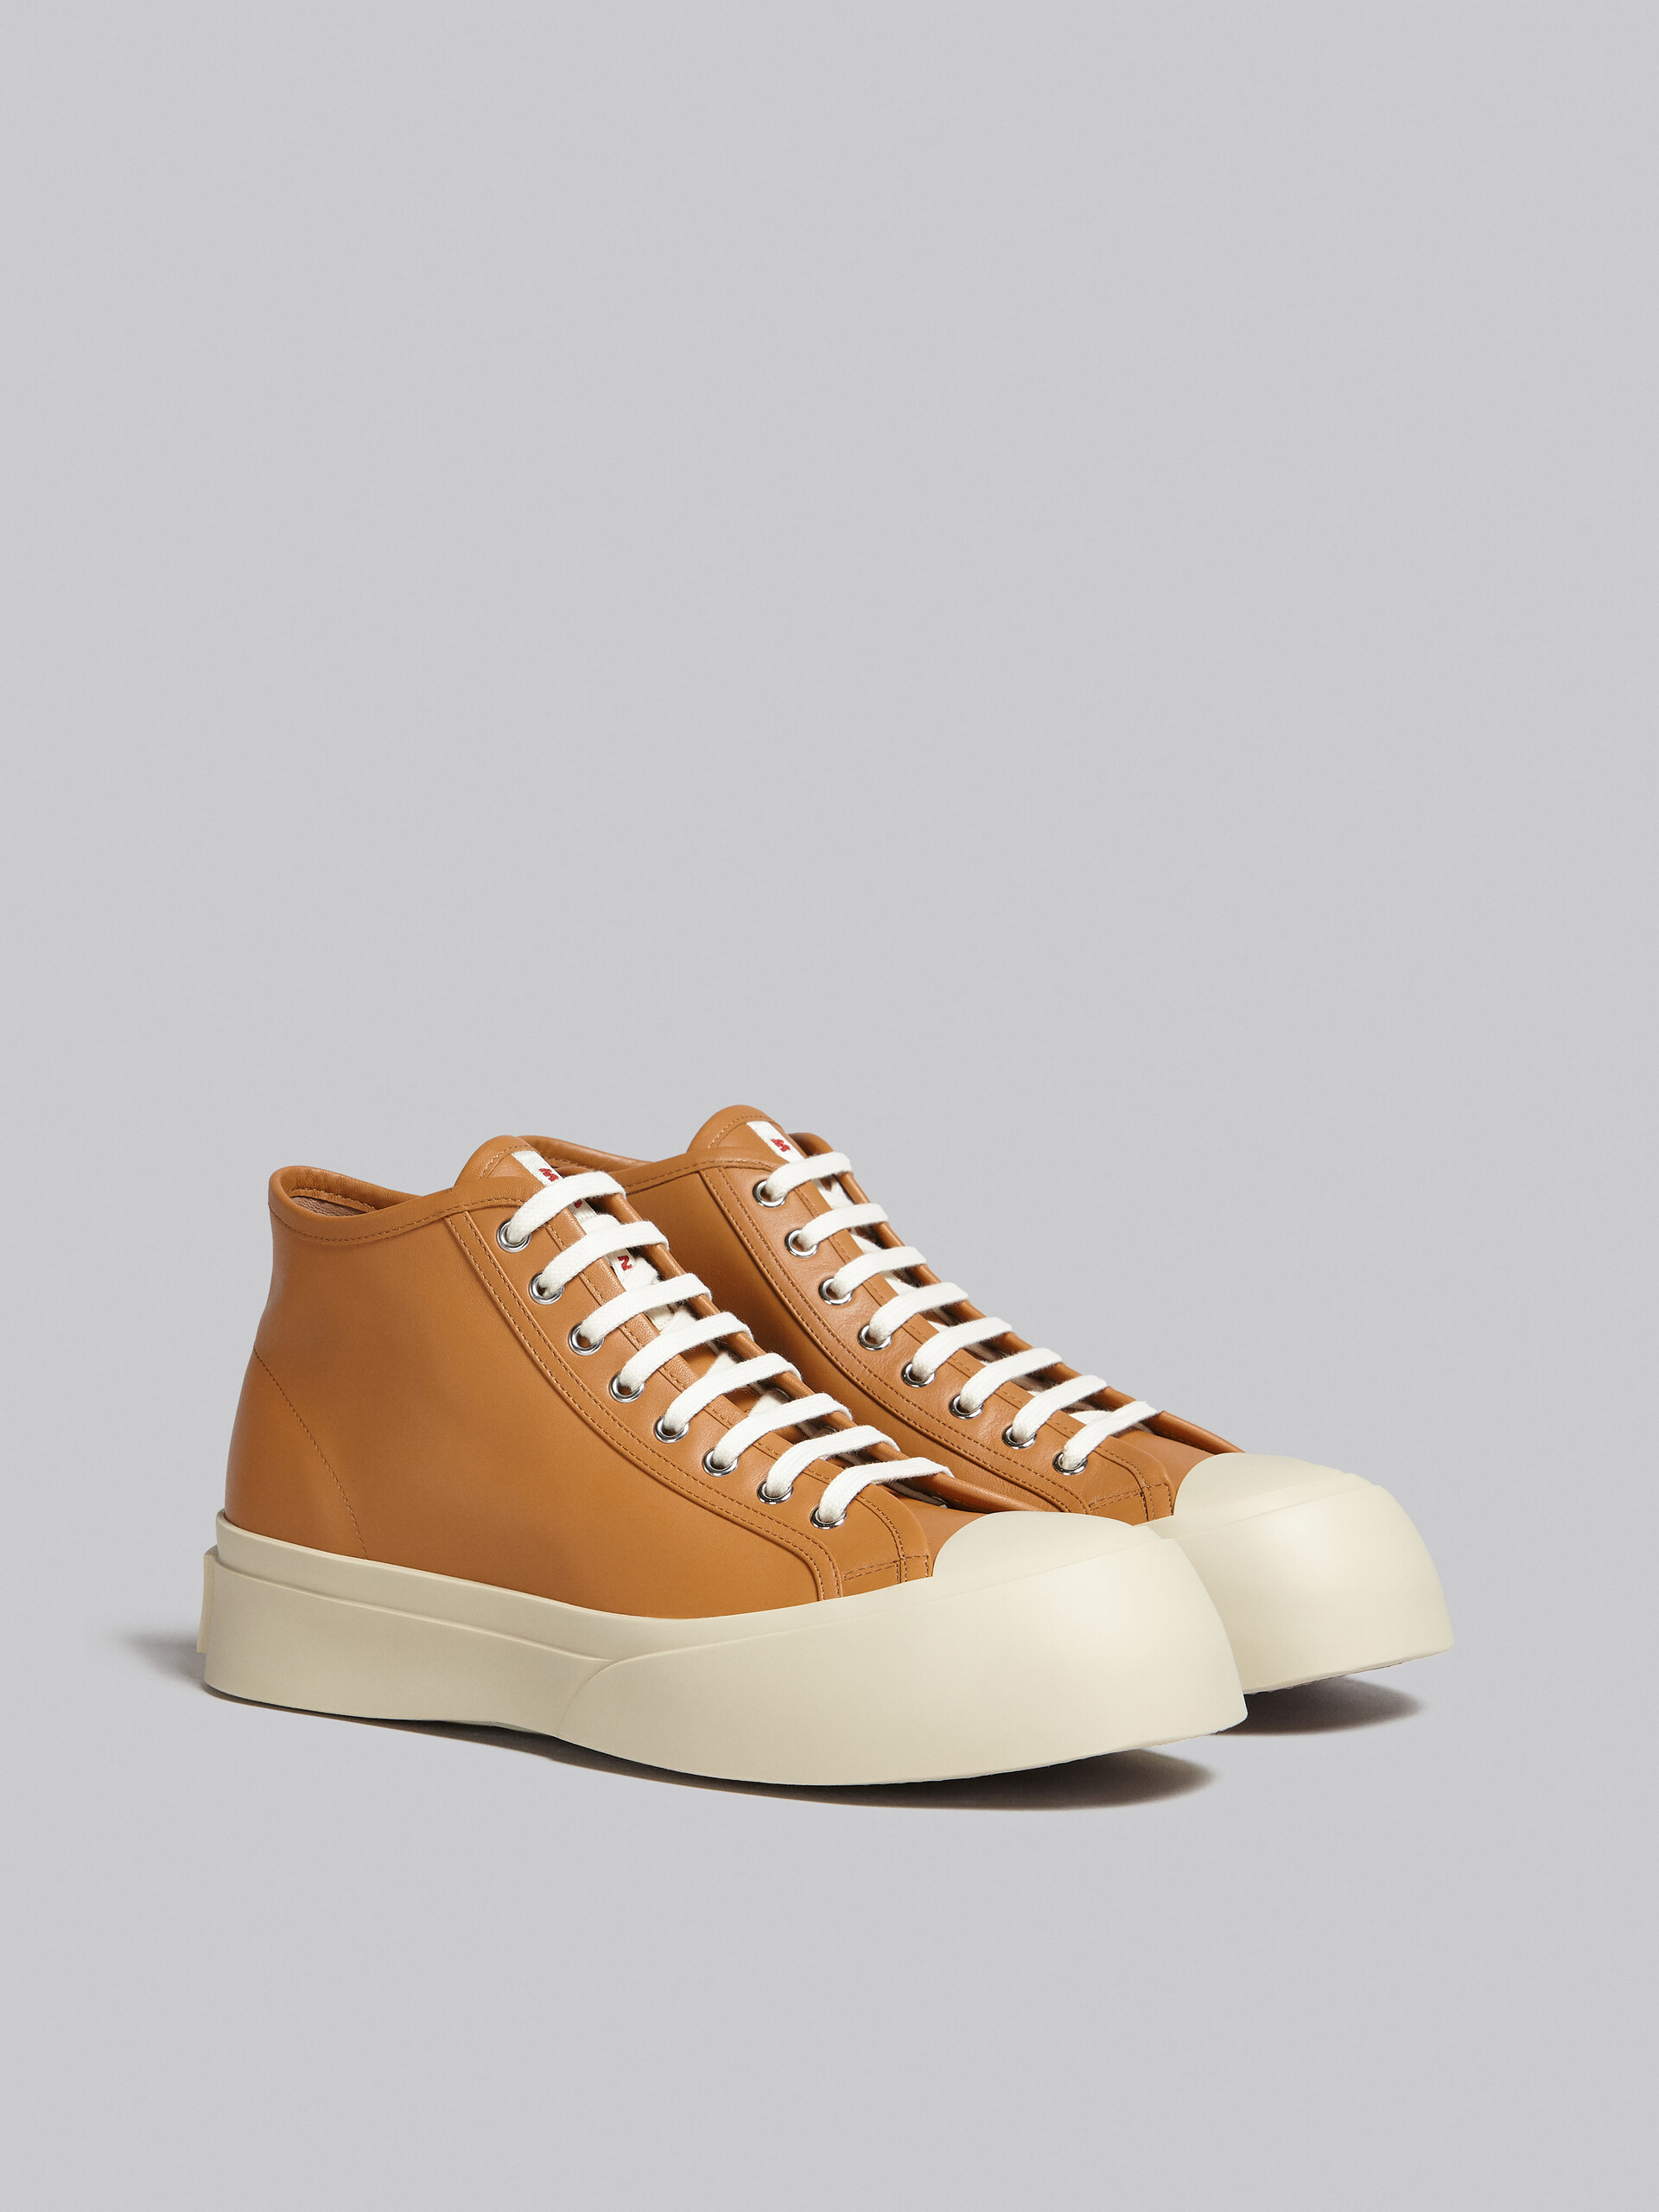 Blue nappa leather Pablo high-top sneaker - Sneakers - Image 2